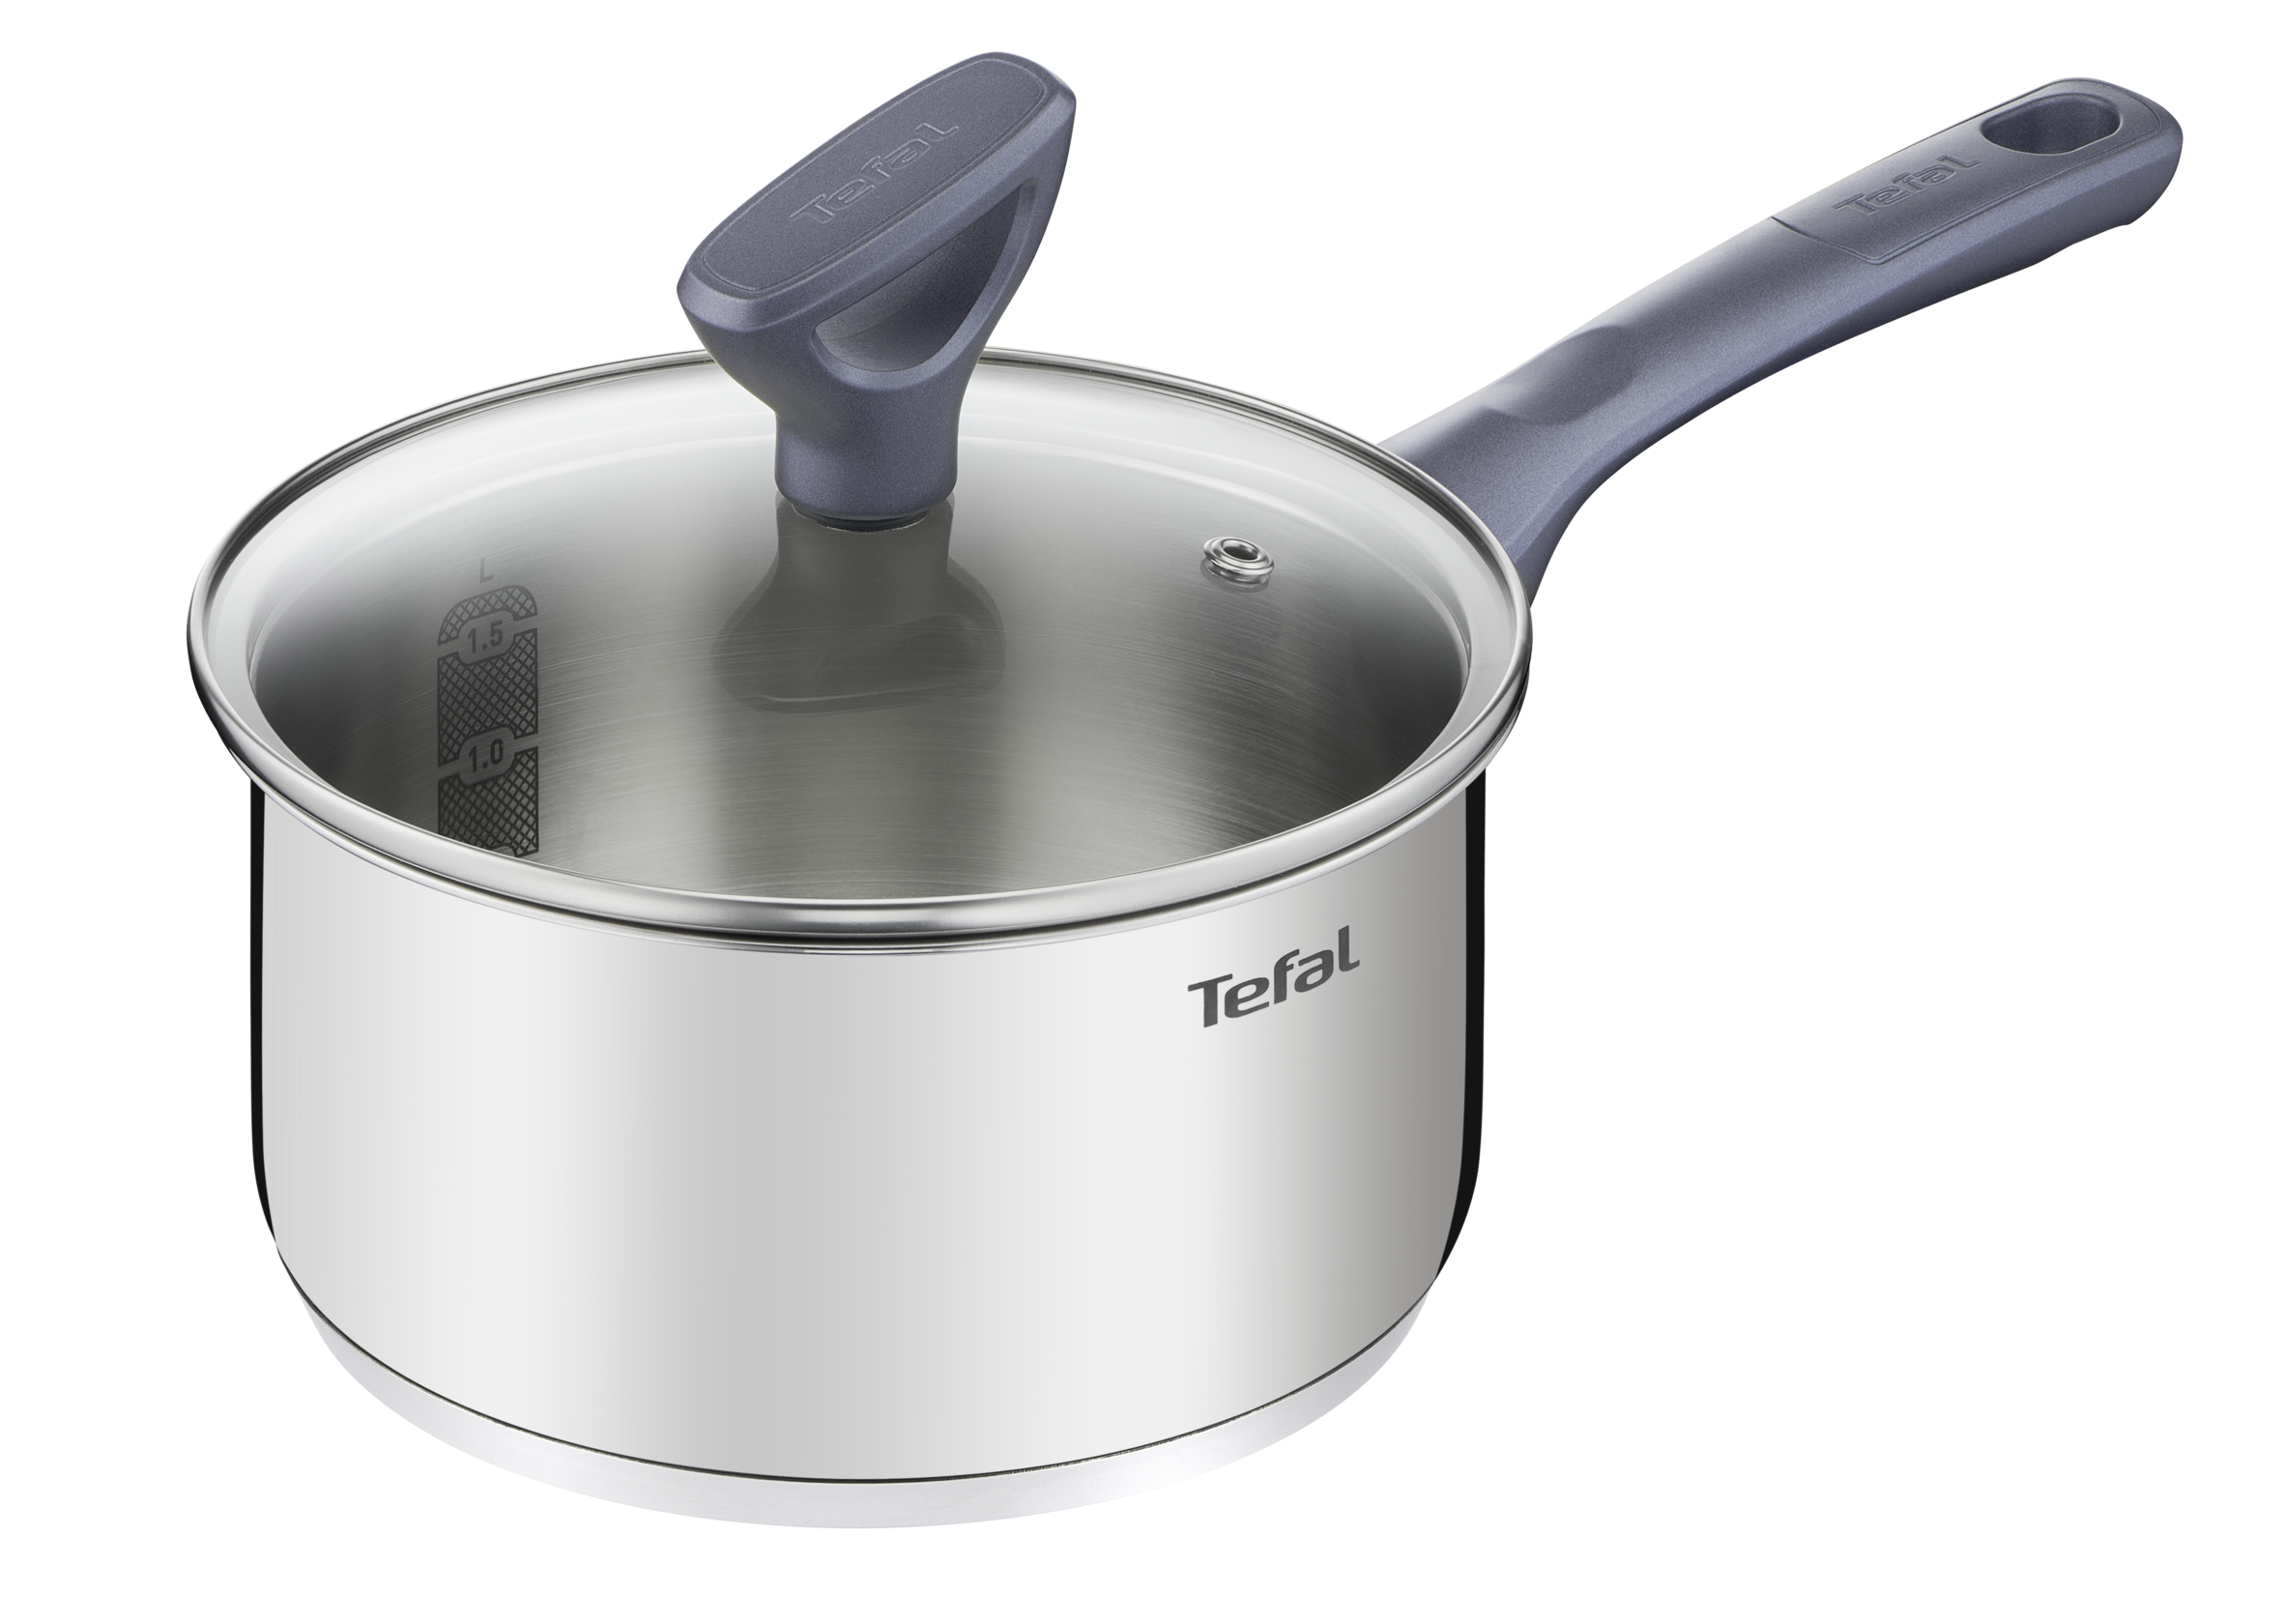 Tefal Daily Cook Stainless Steel Induction Saucepan 18cm/2.1L + Lid